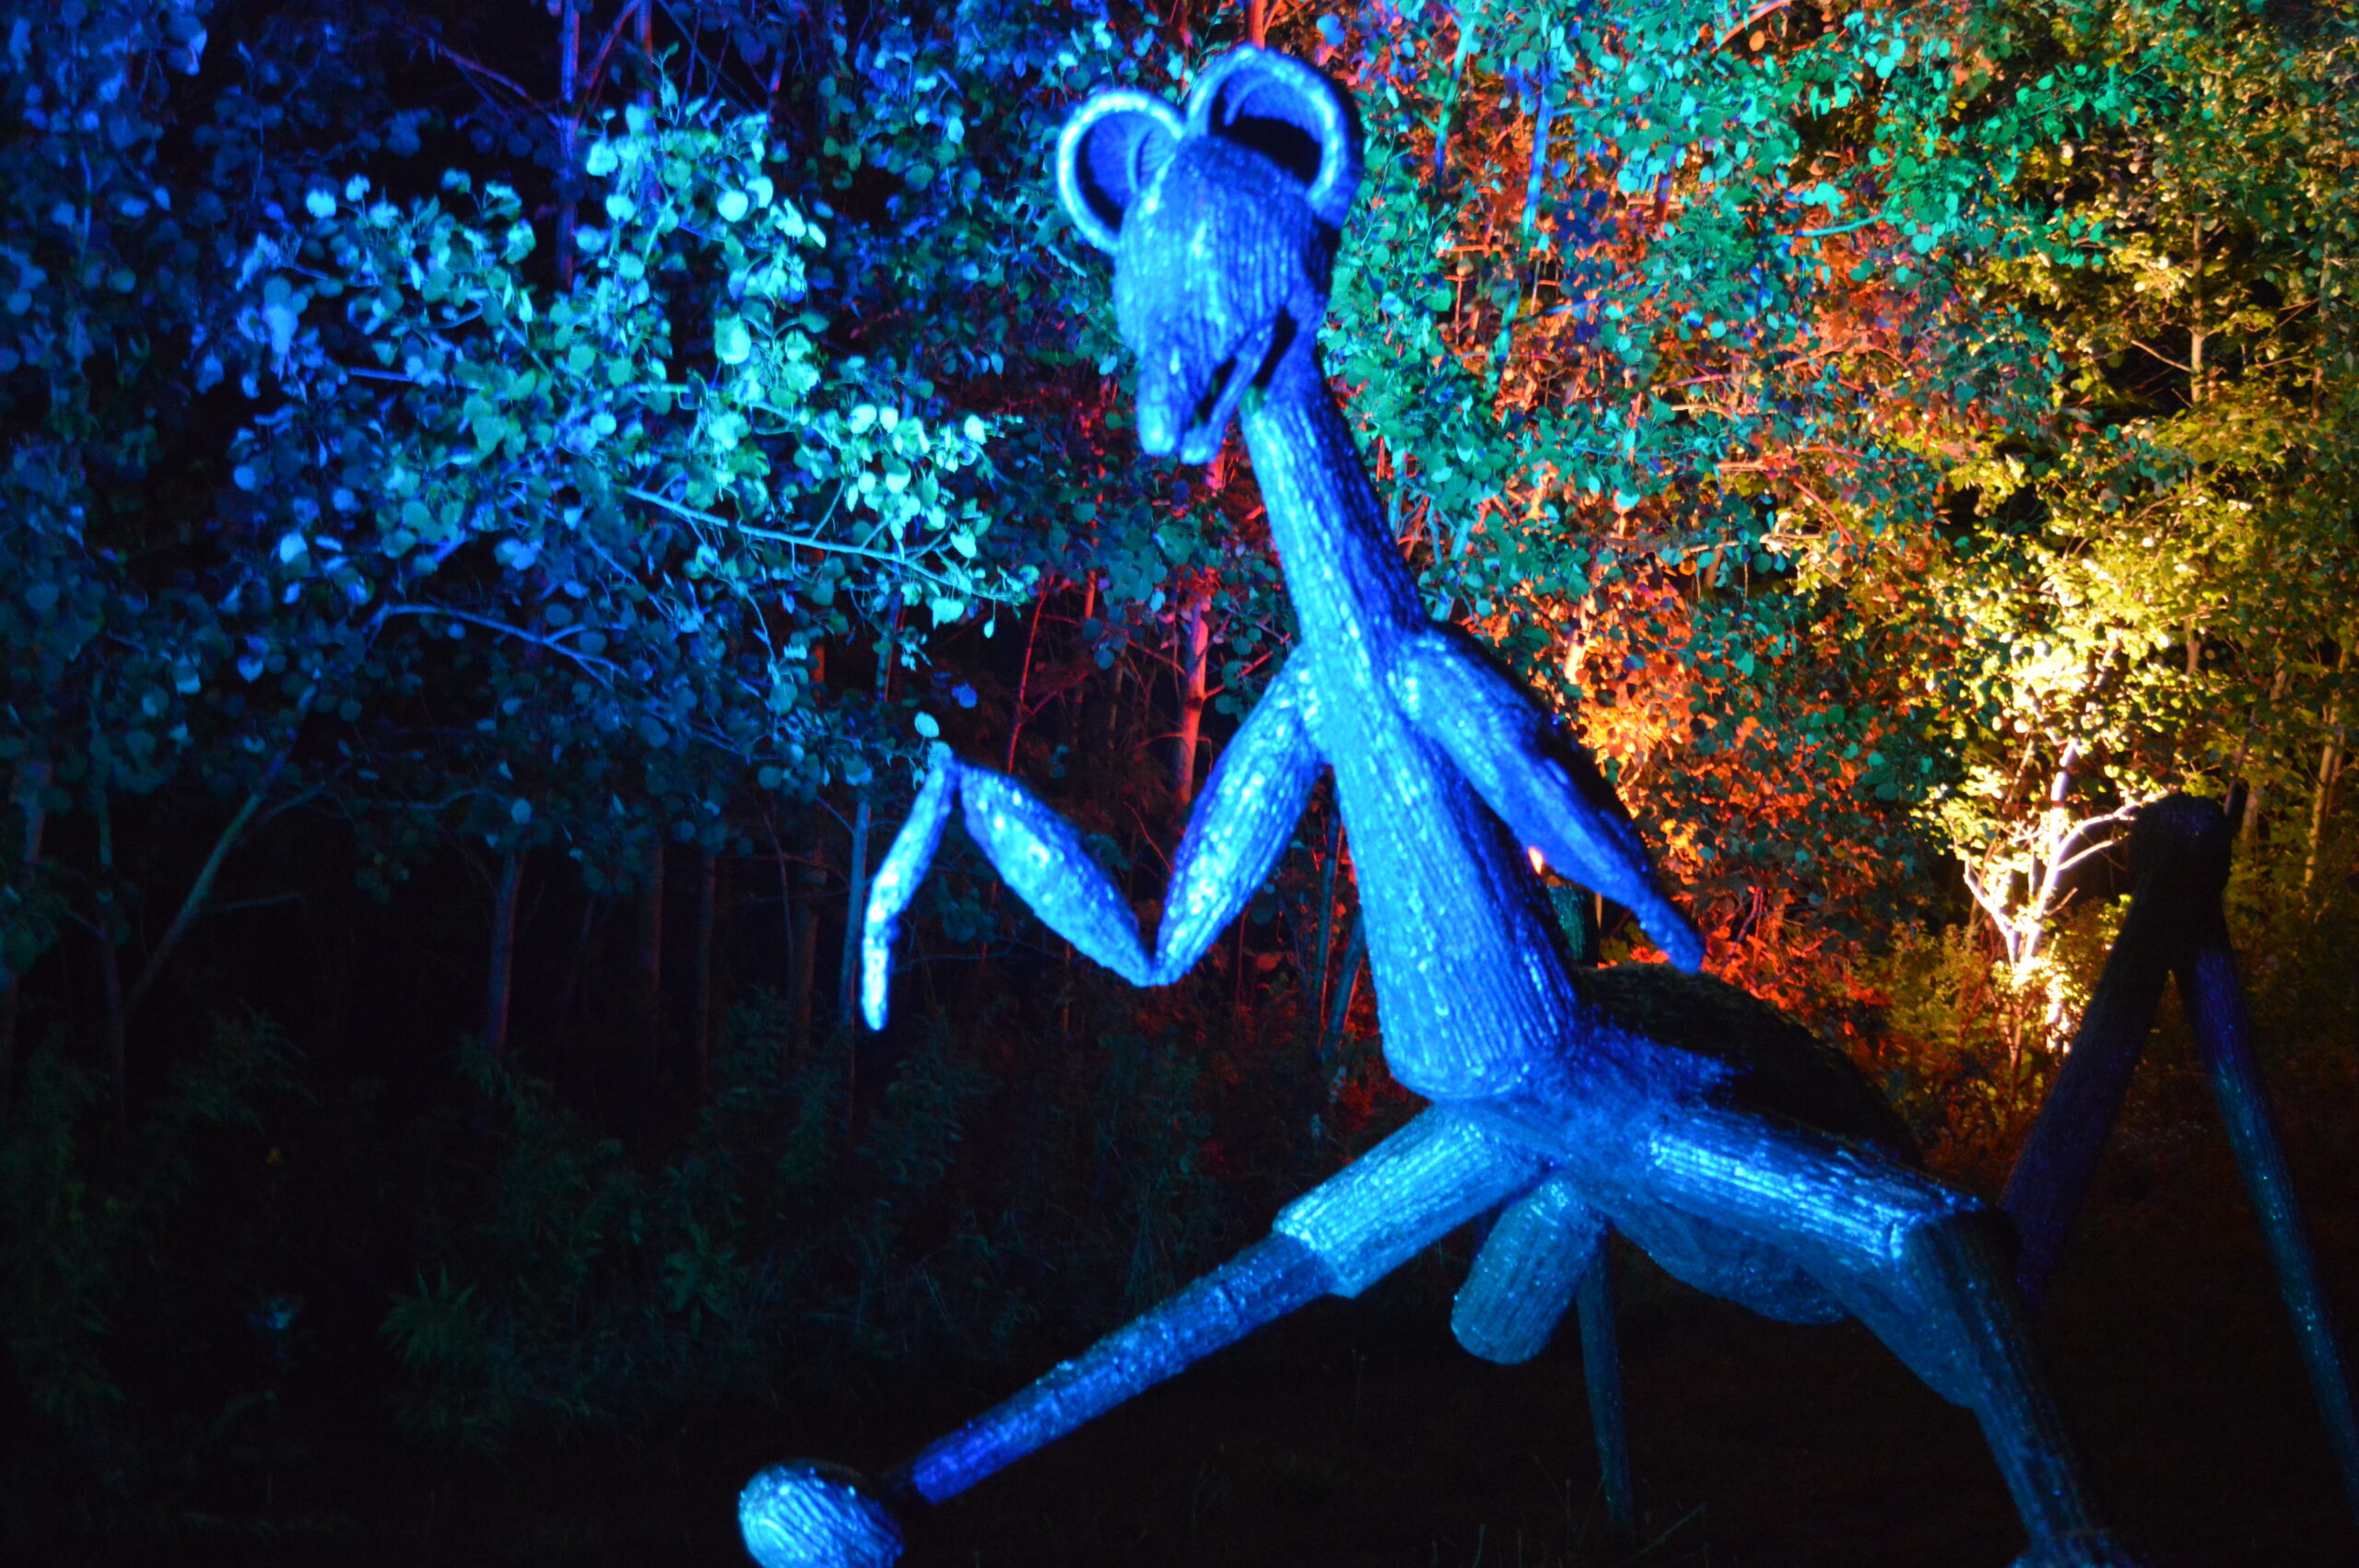 The return of NIGHT LIGHTS at Griffis Sculpture Park